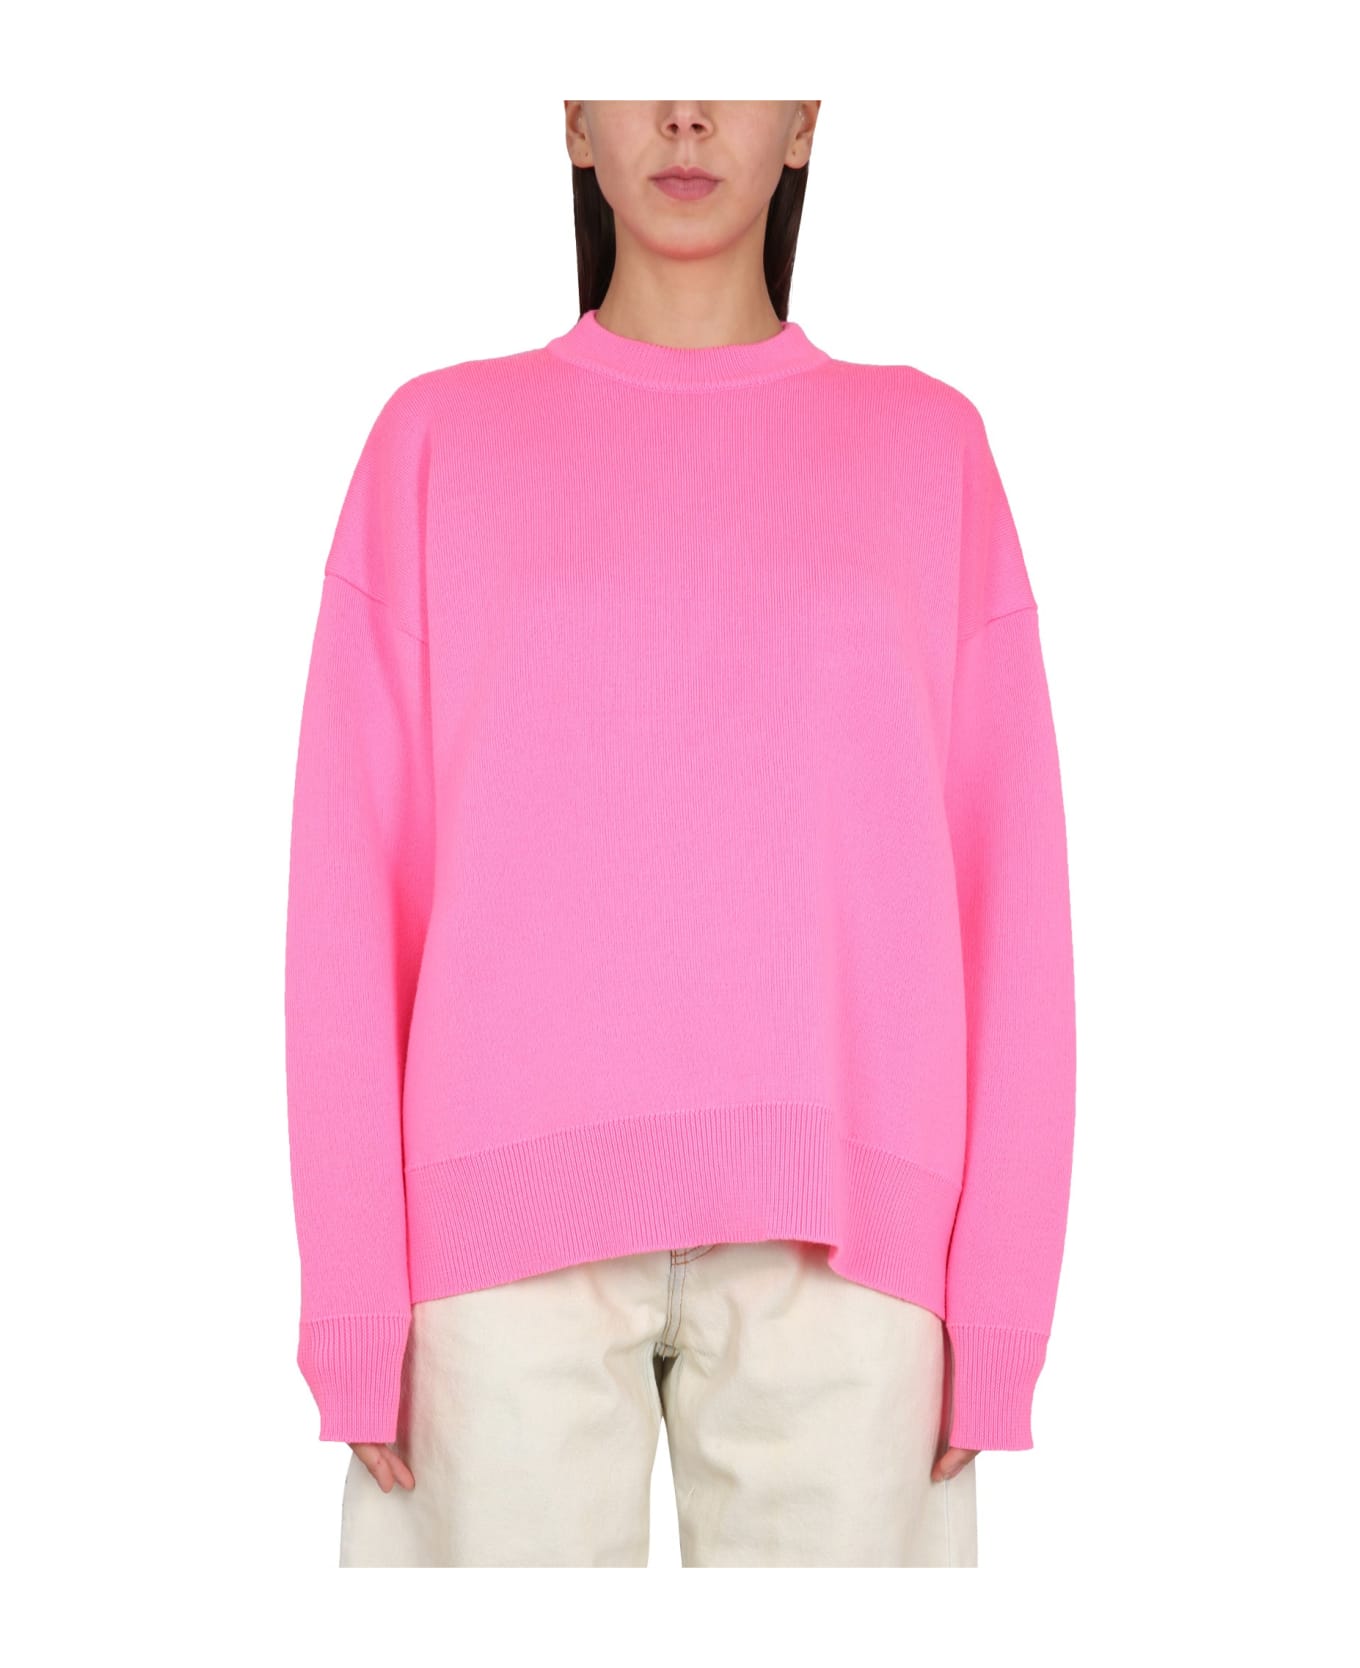 Palm Angels Rose Wool Sweater - PINK MULTICOLOR ニットウェア